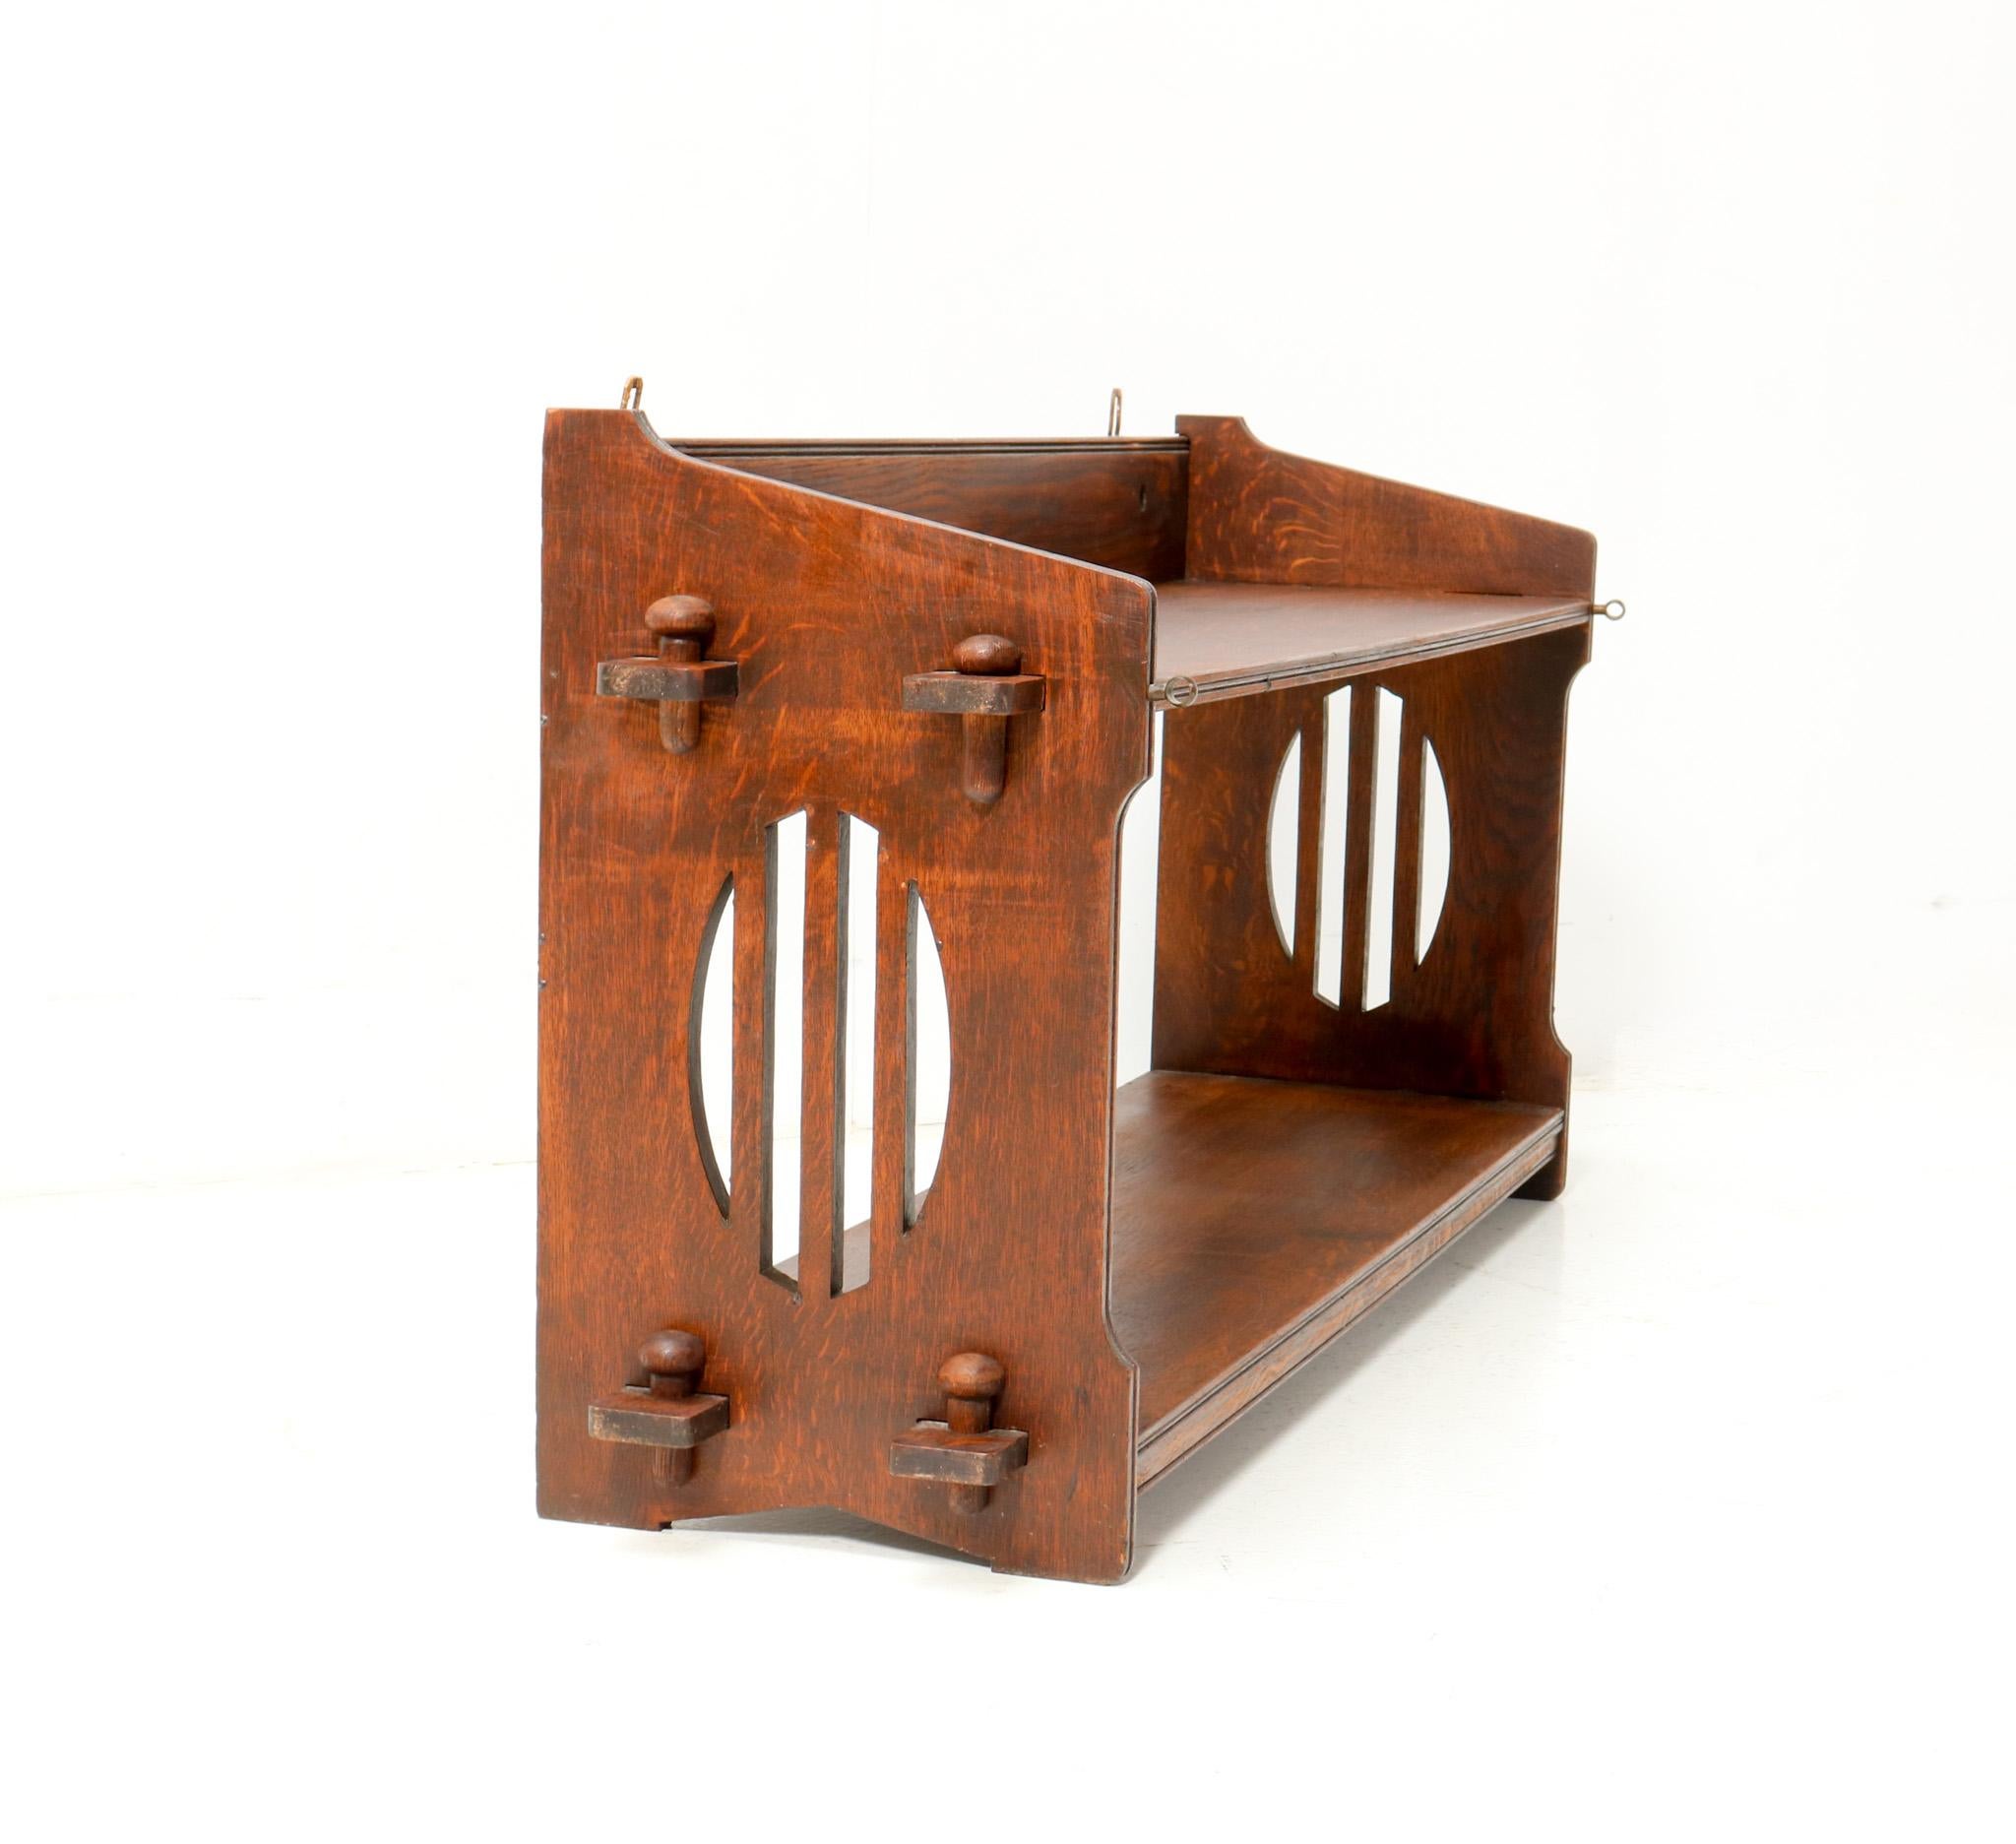 Stunning and rare Arts & Crafts Art Nouveau magazine rack or book rack.
Design by Aug. Zeiss & Cie. Paris.
Striking French design from the 1900s.
Solid oak with original decorative elements.
Marked with original manufacturers metal tag.
This